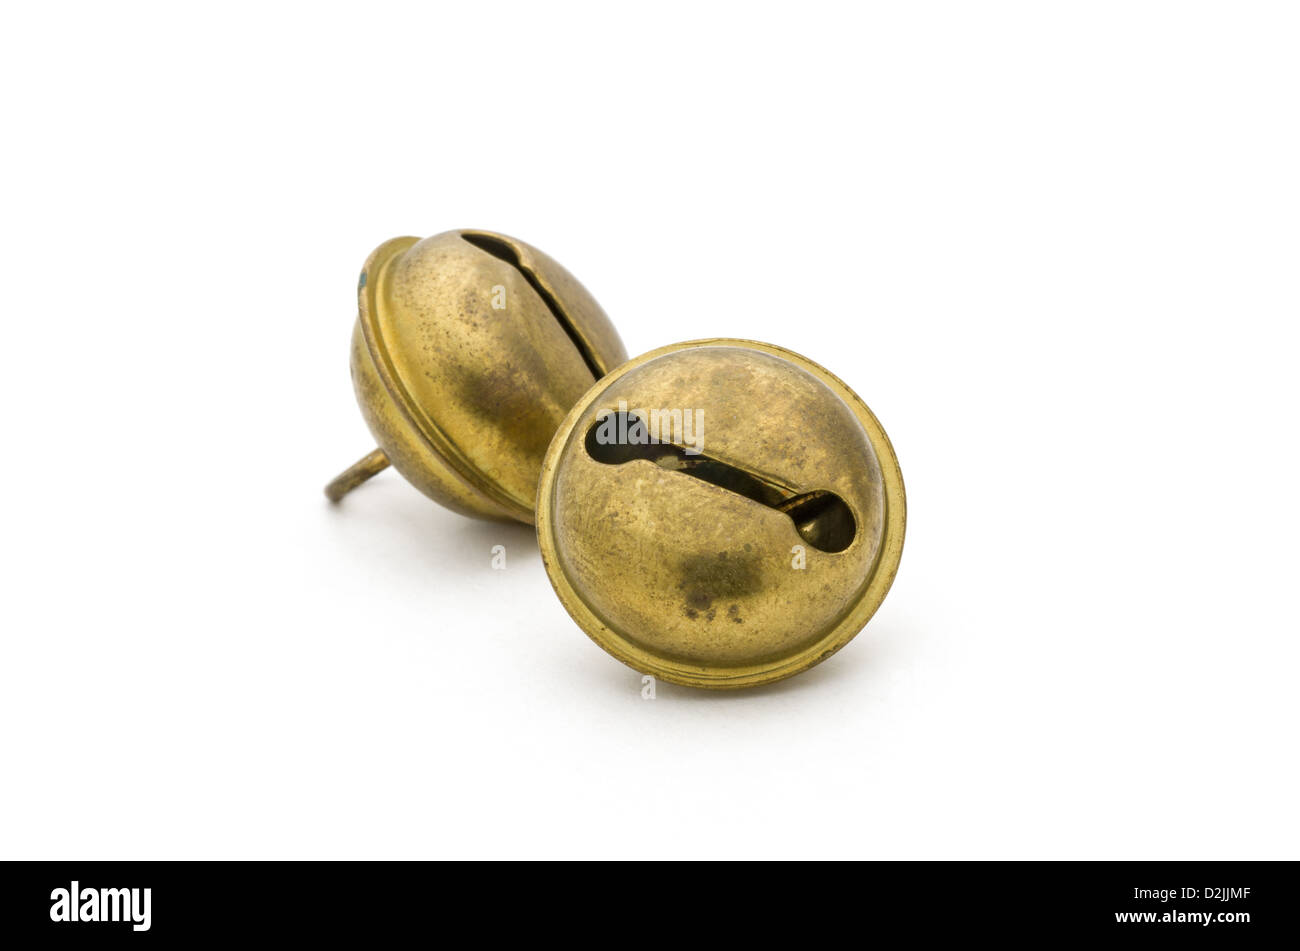 two old golden sleigh bells Stock Photo